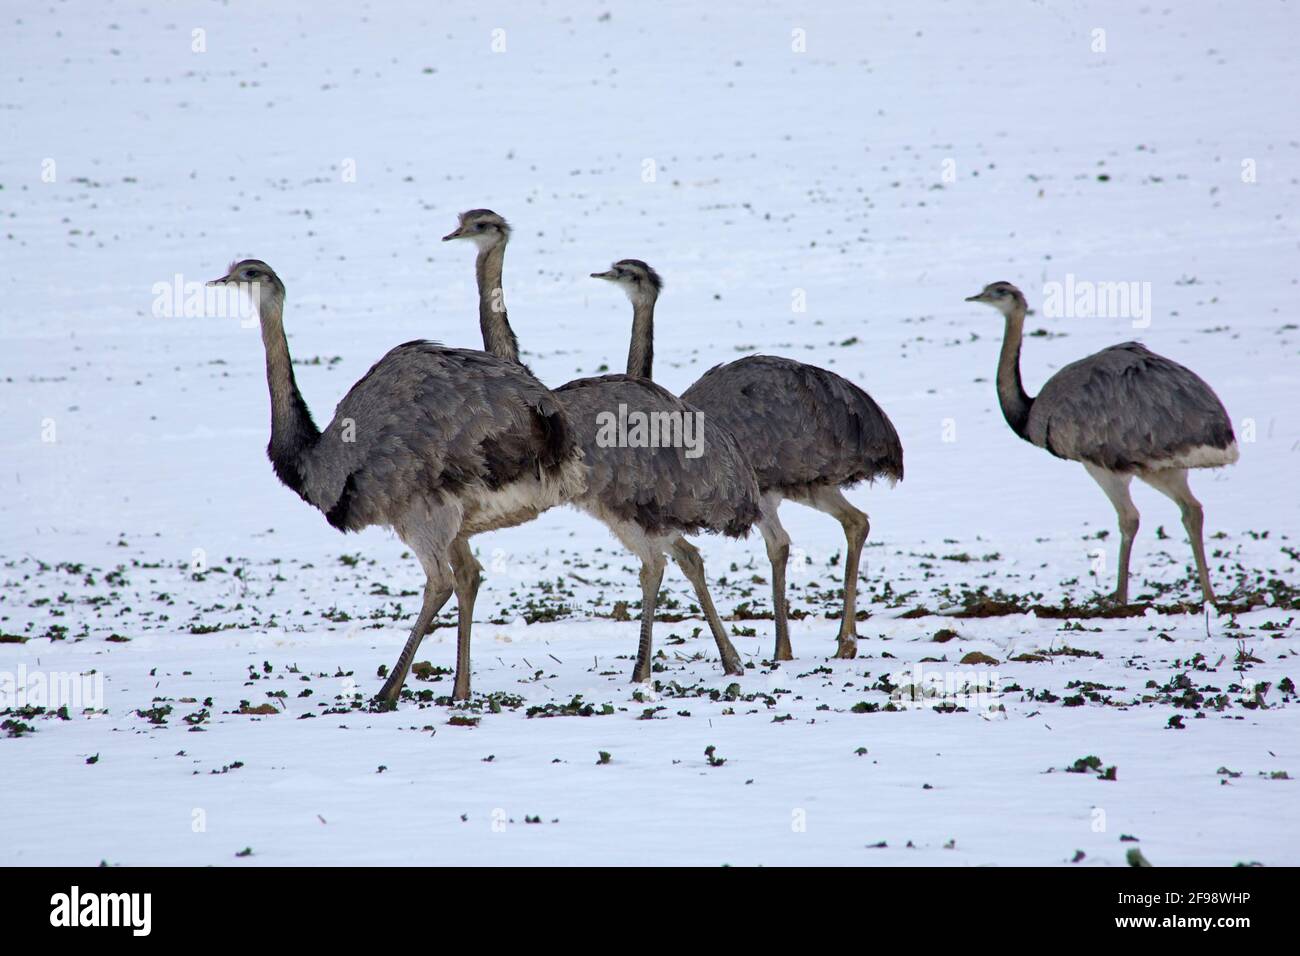 Rhea on a snow-covered field near Utecht on Lake Ratzeburg. Escaped from an enclosure in Gross-Groenau in autumn 2000, up to 300 specimens now live in the Schaalsee biosphere reserve. The real home of the ostrich-like chicken, which is up to 1.70 m tall, is the South American pampas. Stock Photo